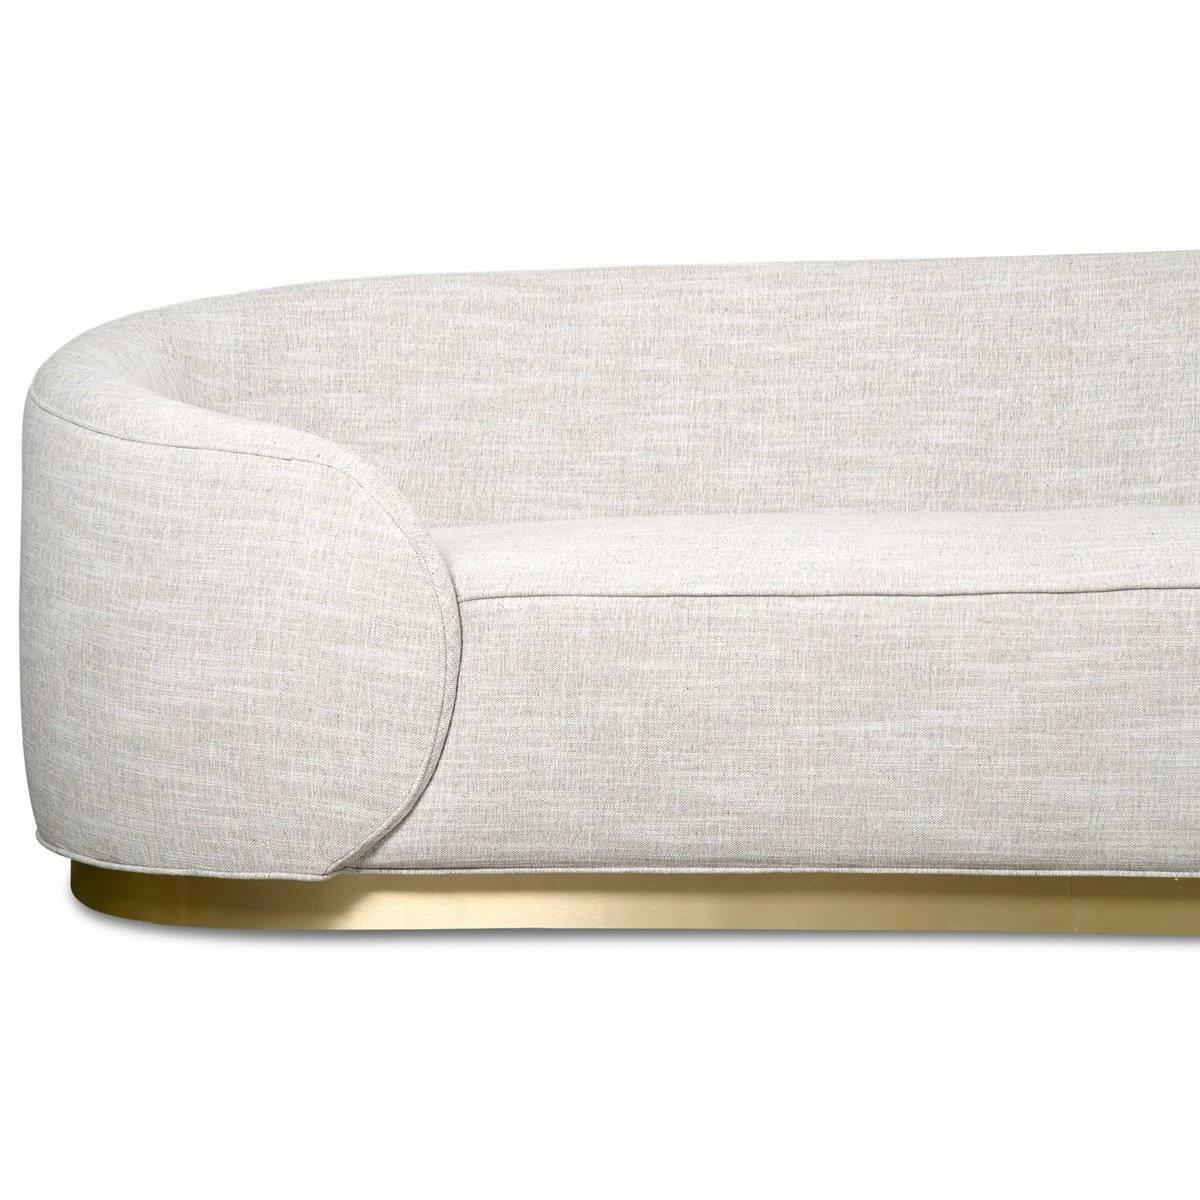 Introducing the Eden Rock sofa in linen. Modern curvy rounded wrap-around arms give a unique look to this bold sofa. The solid natural lines bring serenity and calm to any space. Featuring a customizable brushed brass base and textured tight fitted